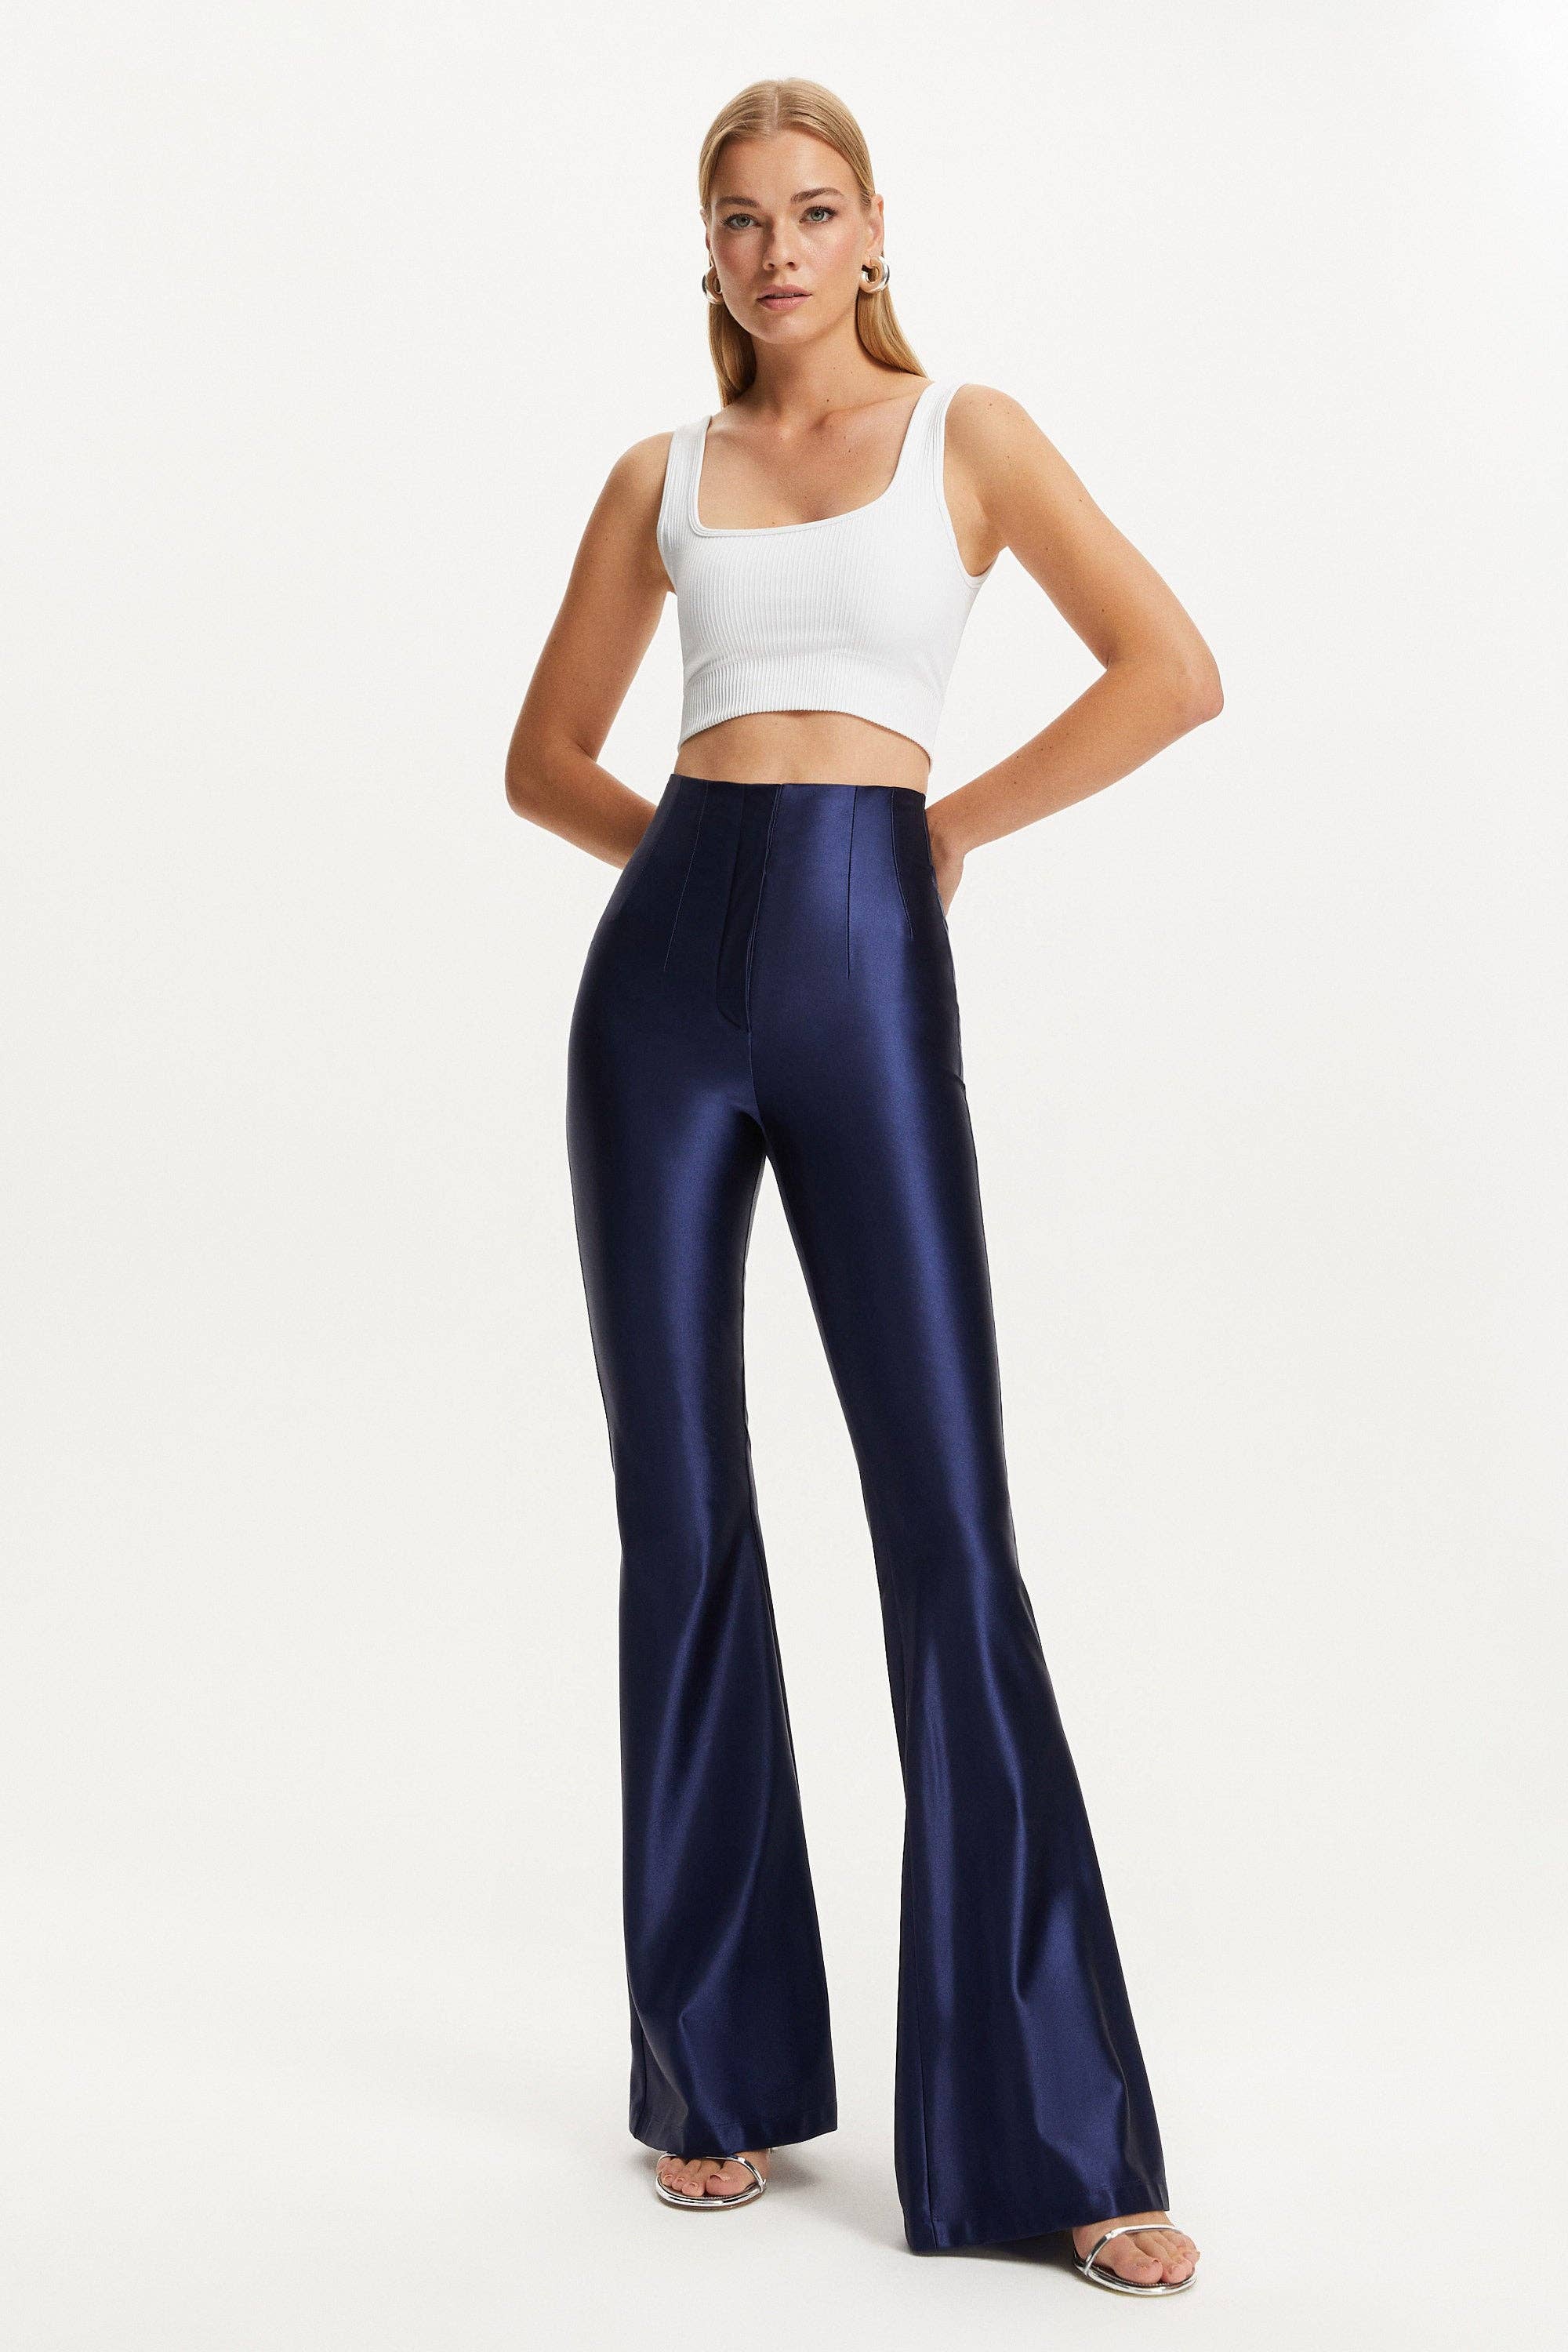 Darted Flare Pants: XL / Navy Blue